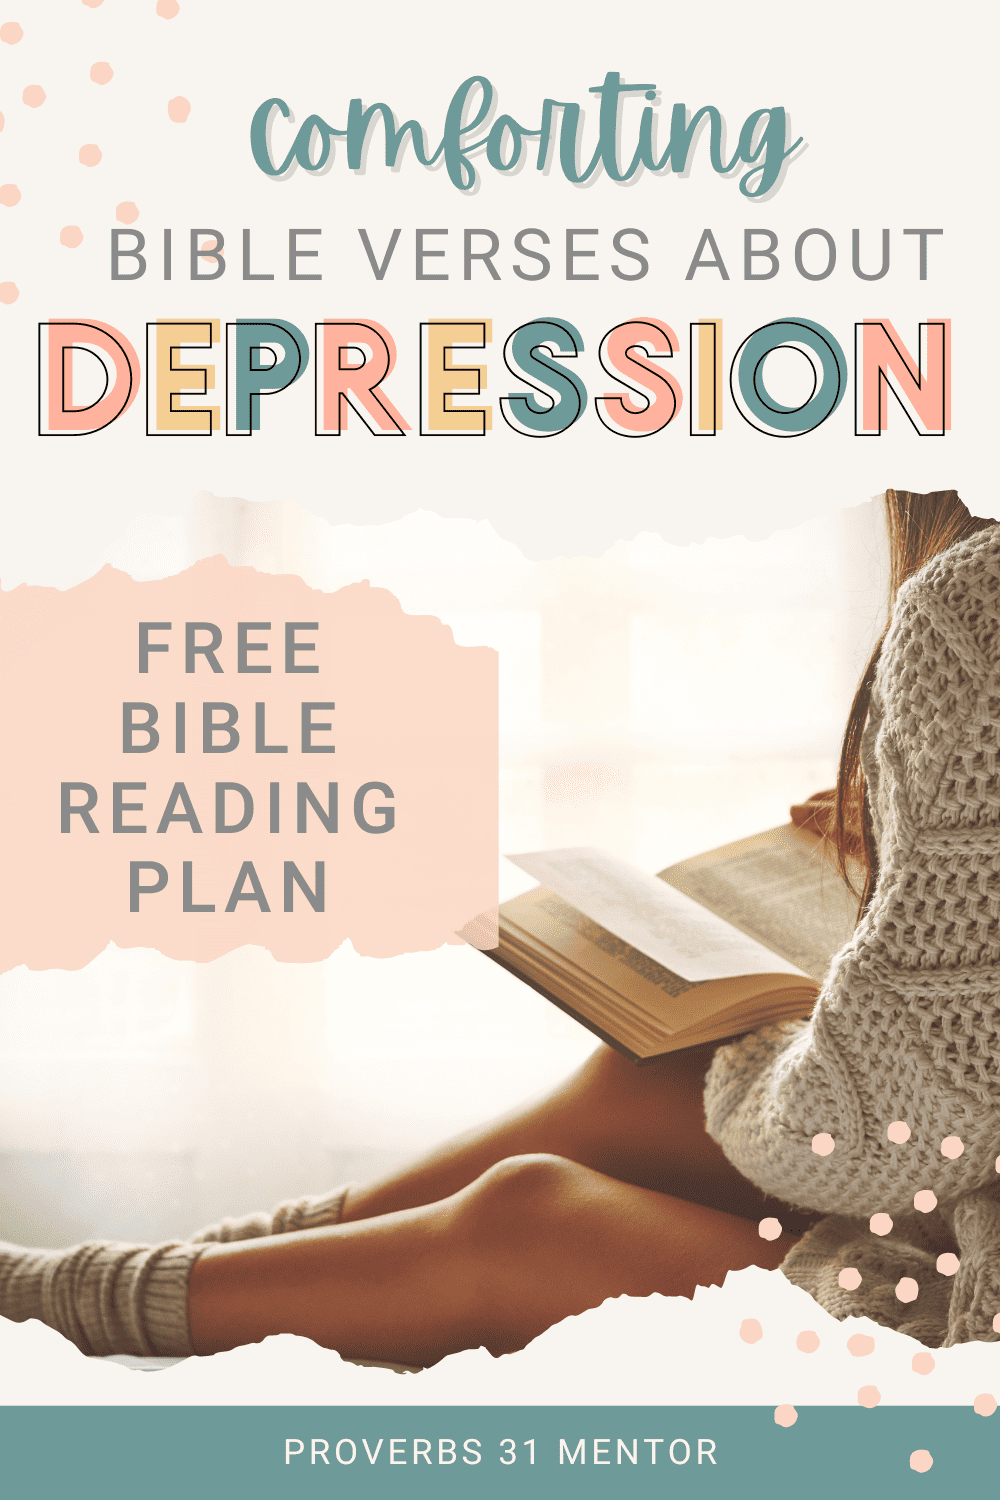 Title- Comforting Bible verses about depression Picture- woman reading in bed